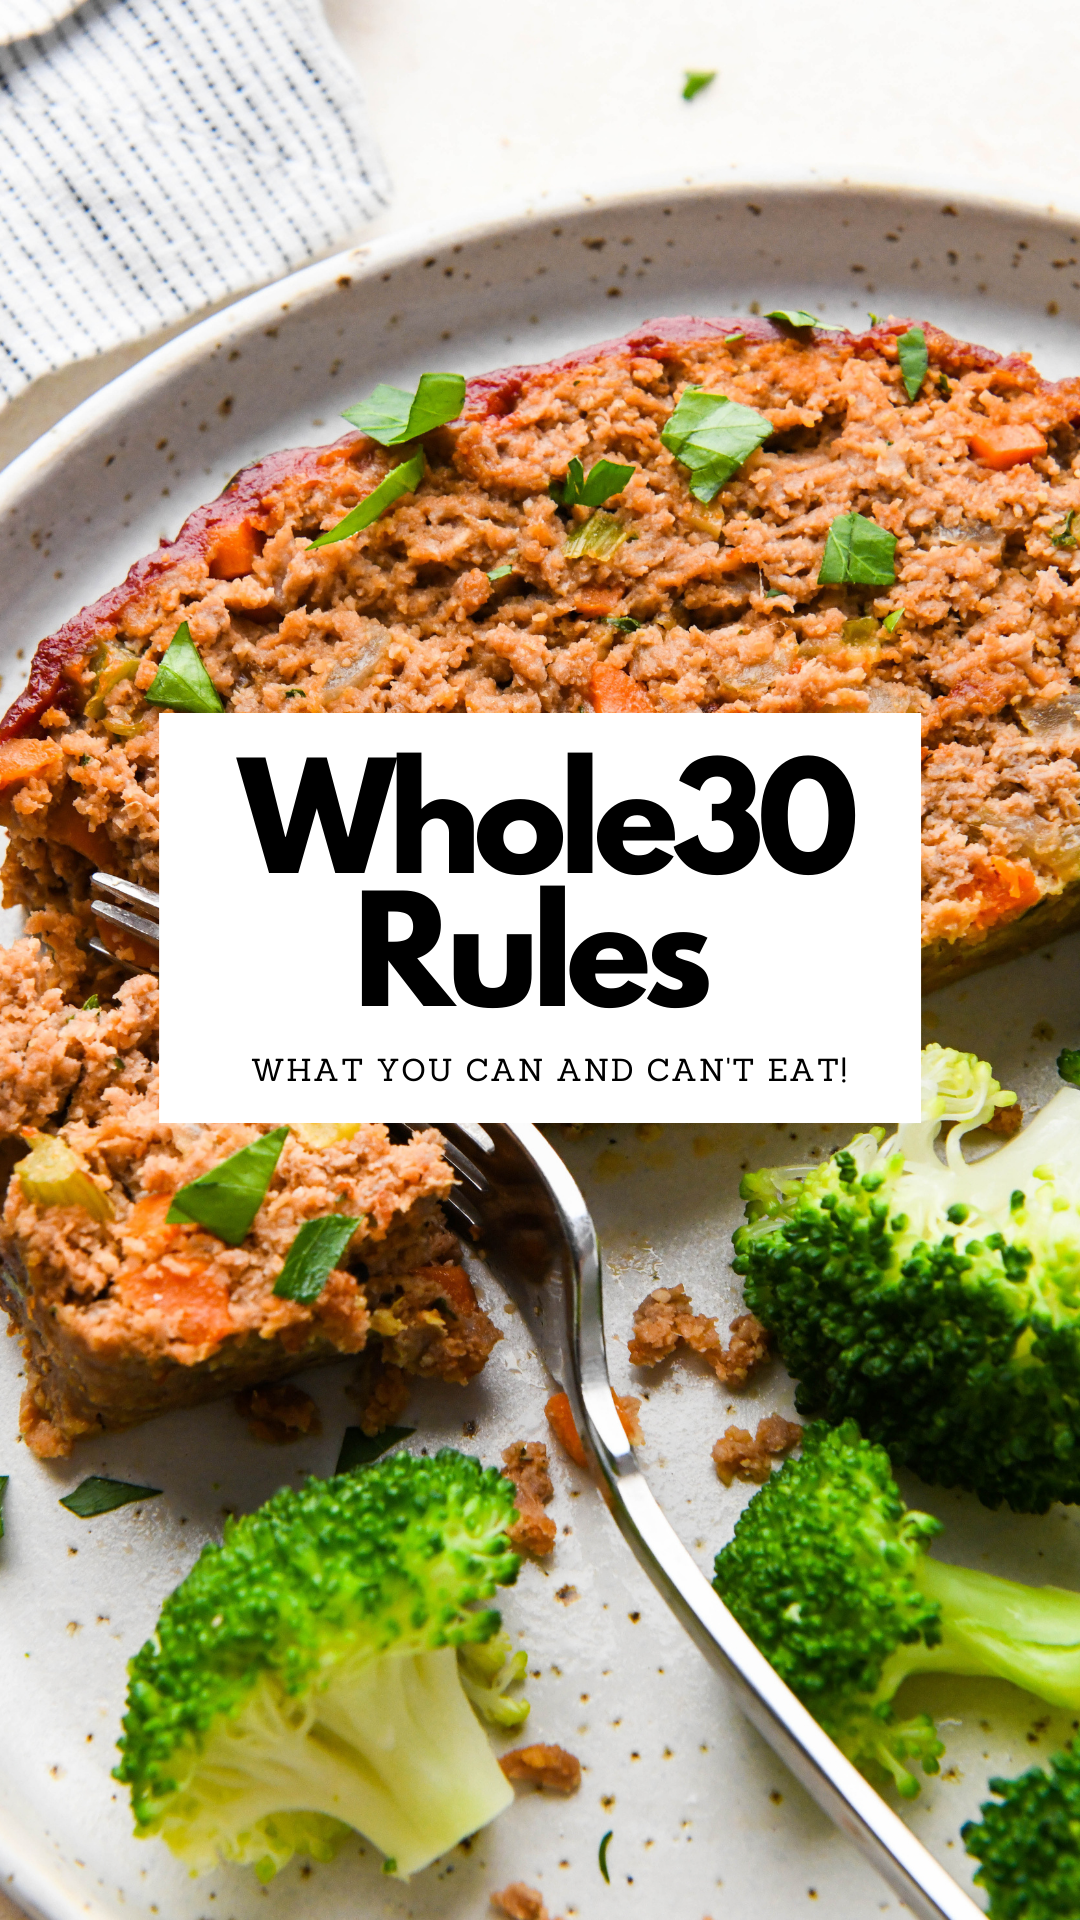 Take the guesswork out of planning for your Whole30 by downloading this Whole30 approved food list & Whole30 guide to additives & hidden ingredients. These printable lists include everything you need to know to plan your meals and successfully navigate reading labels so you know exactly what you can and can't eat during your Whole30!